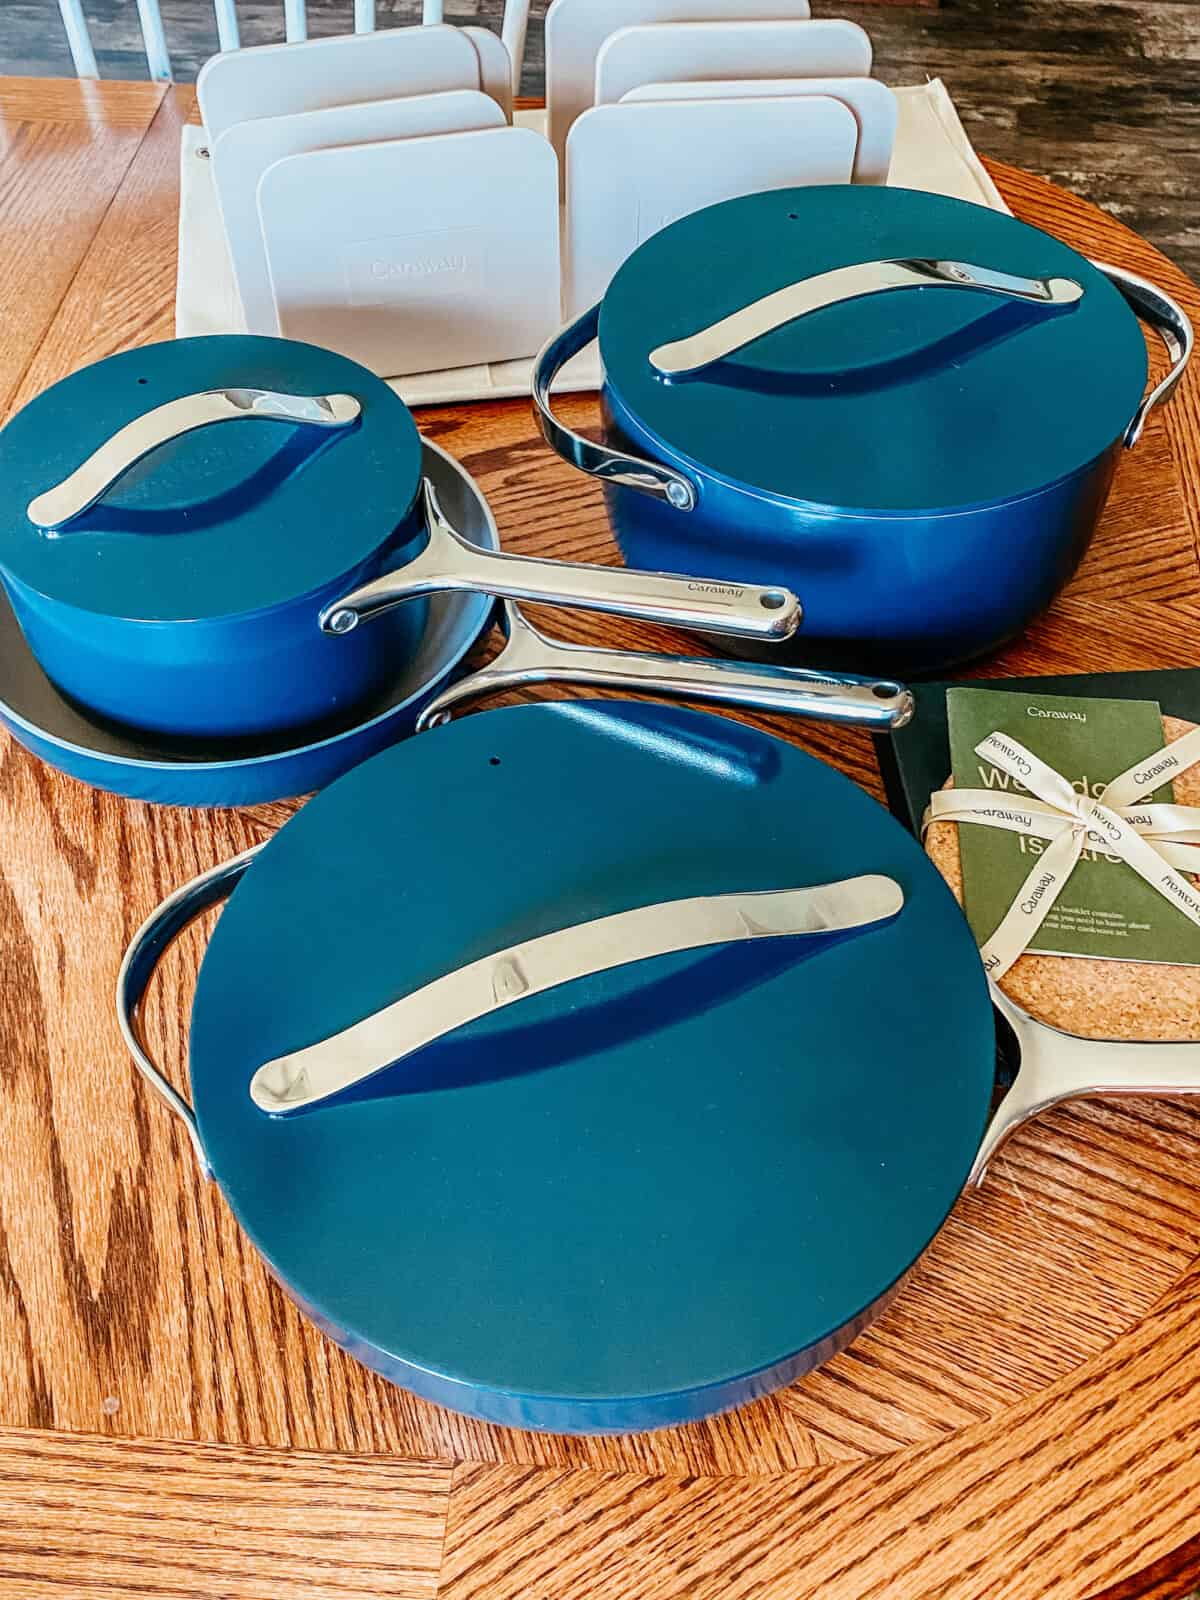 caraway cookware set on a dining table.